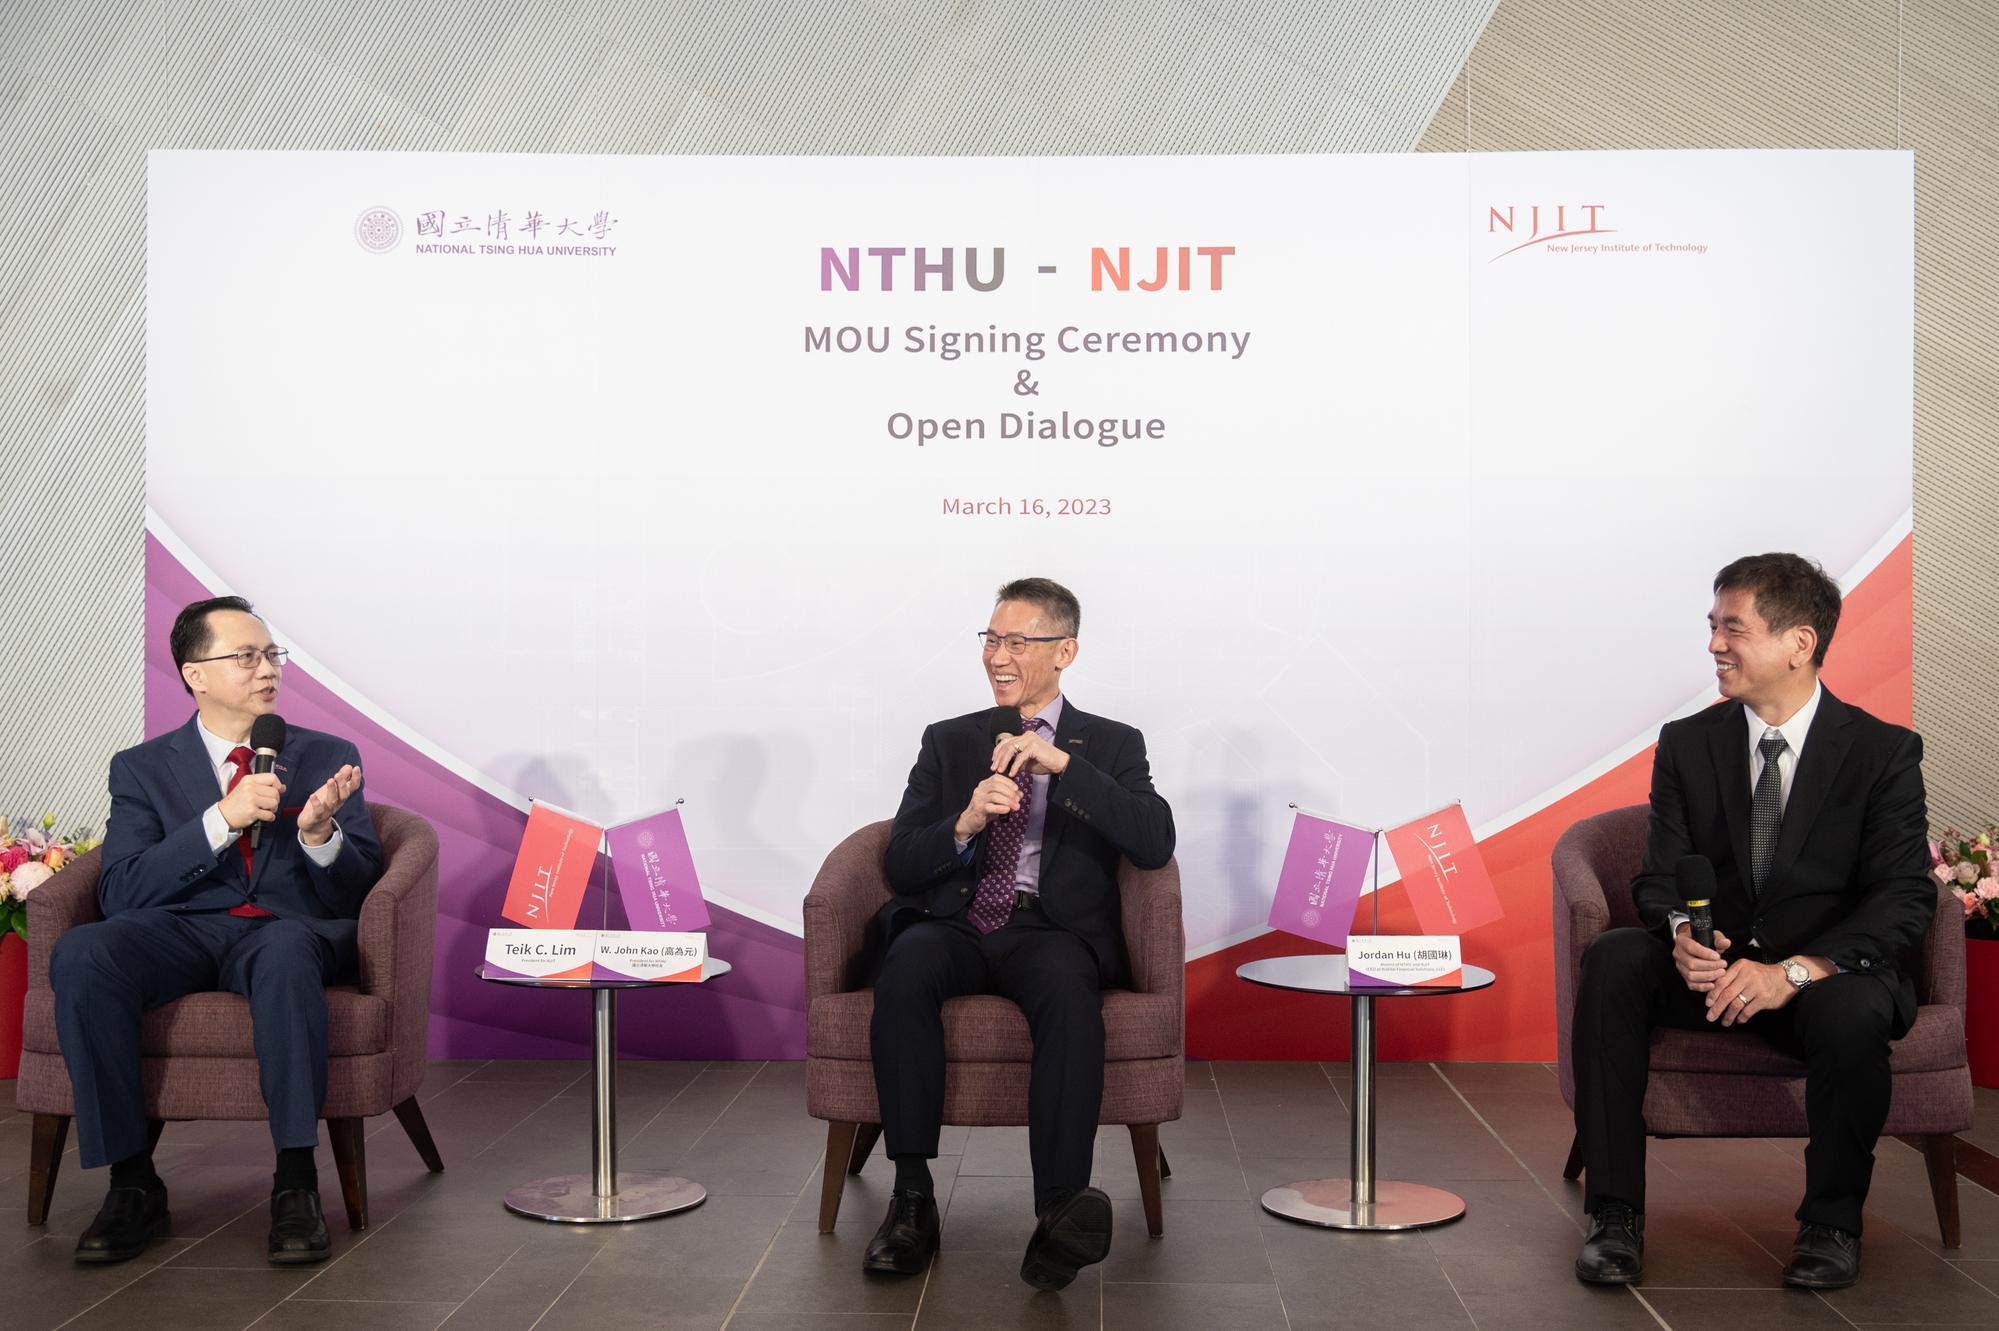 During the signing ceremony NTHU president W. John Kao (center) and NJIT president Teik C. Lim (left) held an open dialogue on the topic of “Innovation and Entrepreneurship,” with Jordan Hu (right) acting as the moderator. 